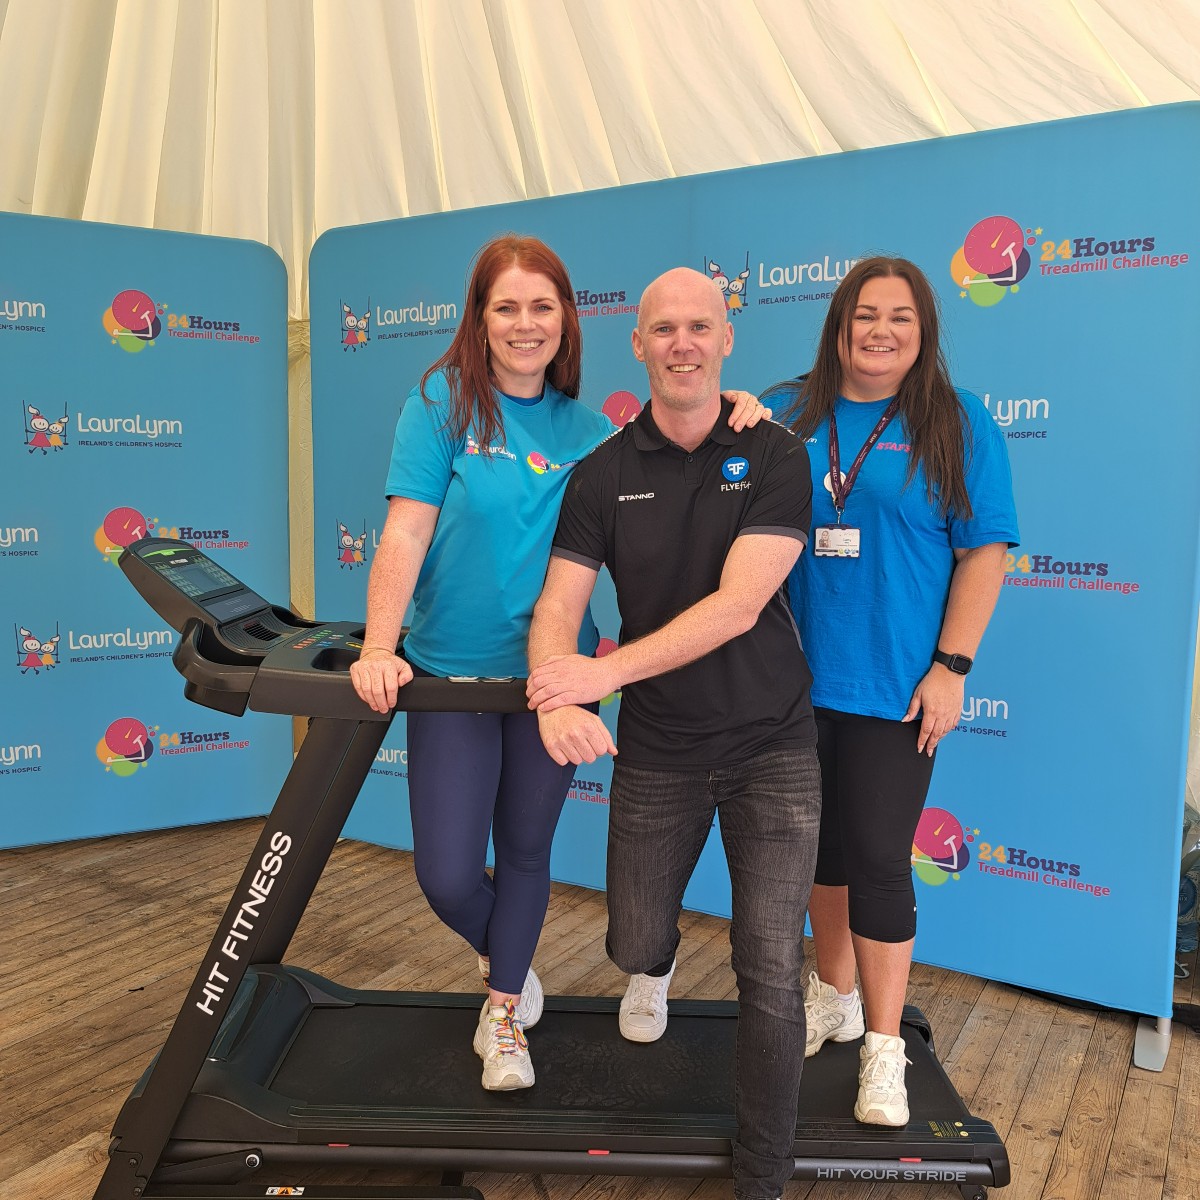 🎉 Our 24-Hour Treadmill Challenge is officially underway, and we couldn't be more thrilled! 🏃‍♀️🏃‍♂️💙 If you'd like to make a donation to support everyone who is keeping the treadmills moving for the next 24 hours, visit here and click the donate button: brnw.ch/21wK3yx